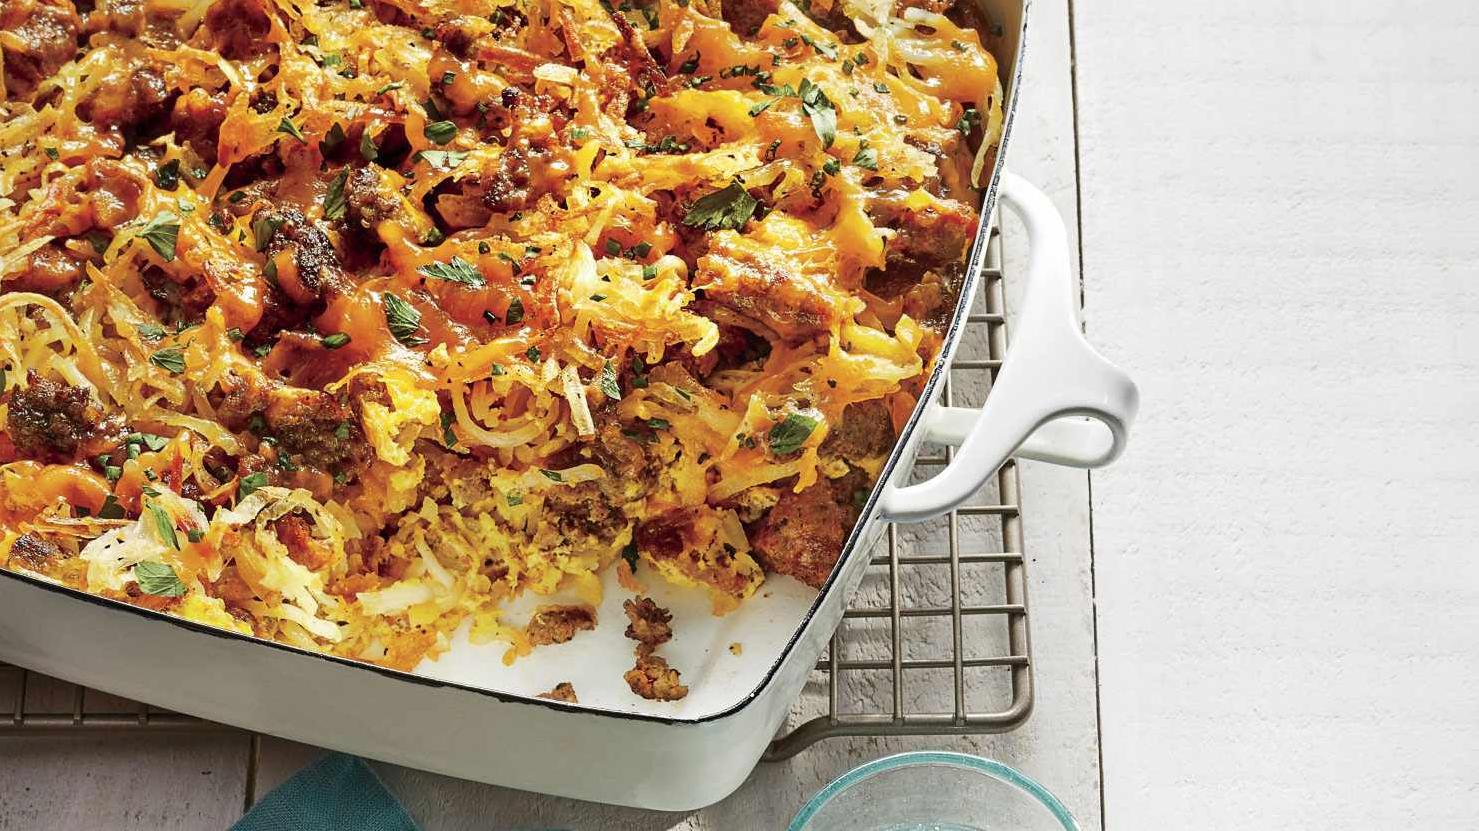  A hearty casserole that's as delicious as it is easy to make